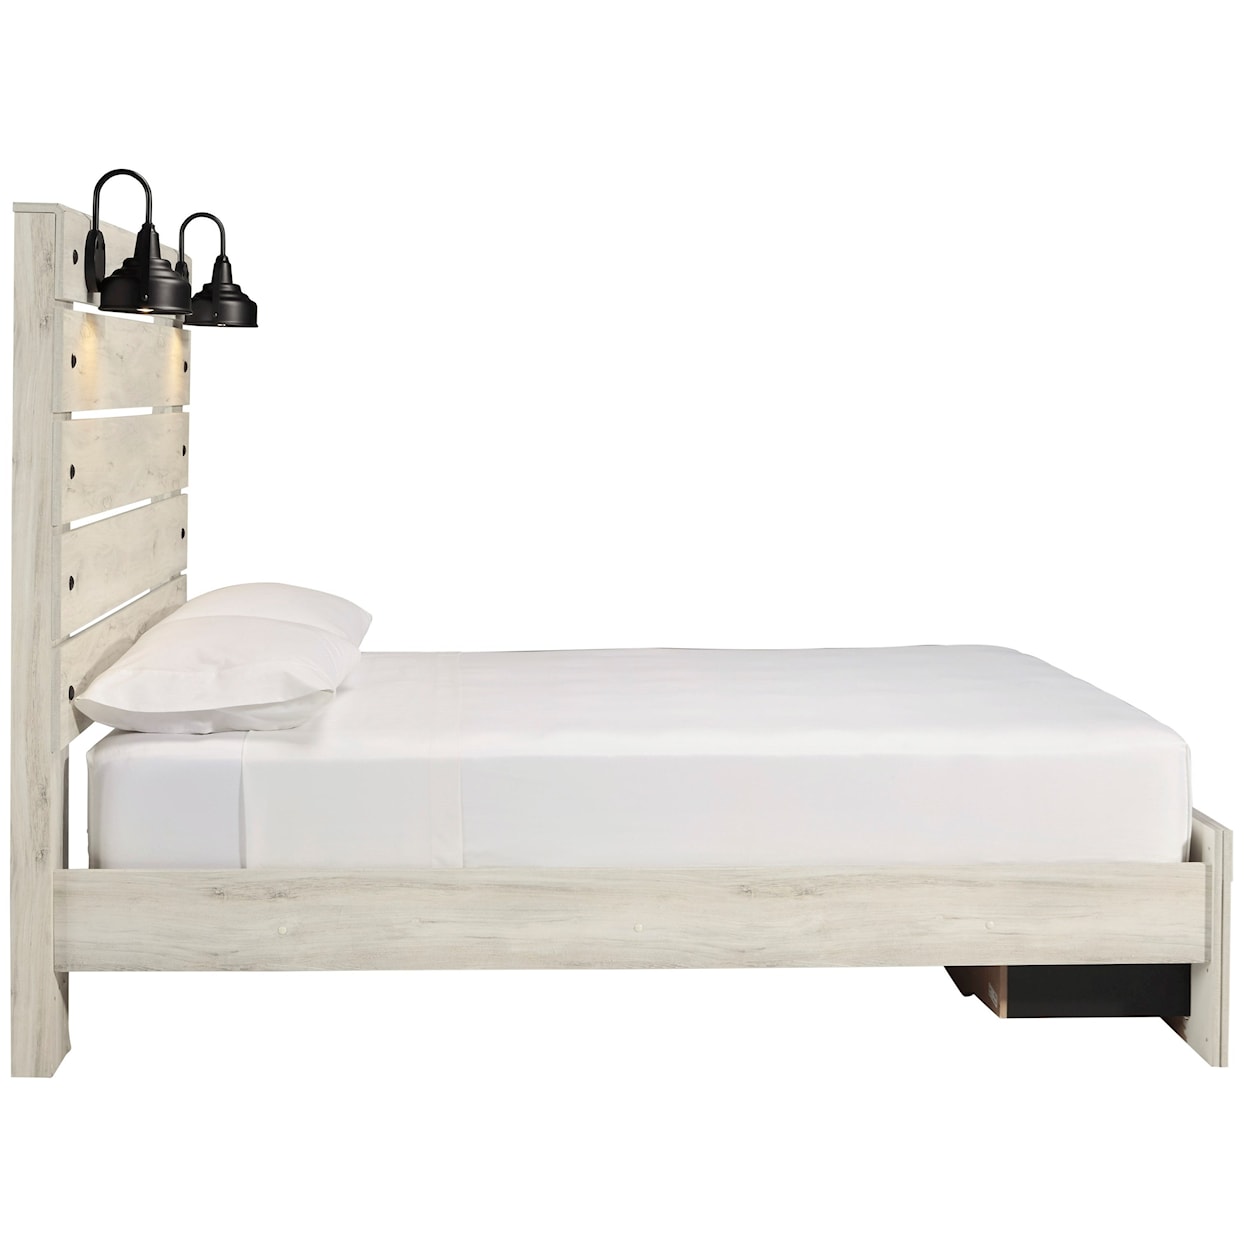 StyleLine APOLLO2 DYLAN Queen Bed w/ Lights & Footboard Drawers